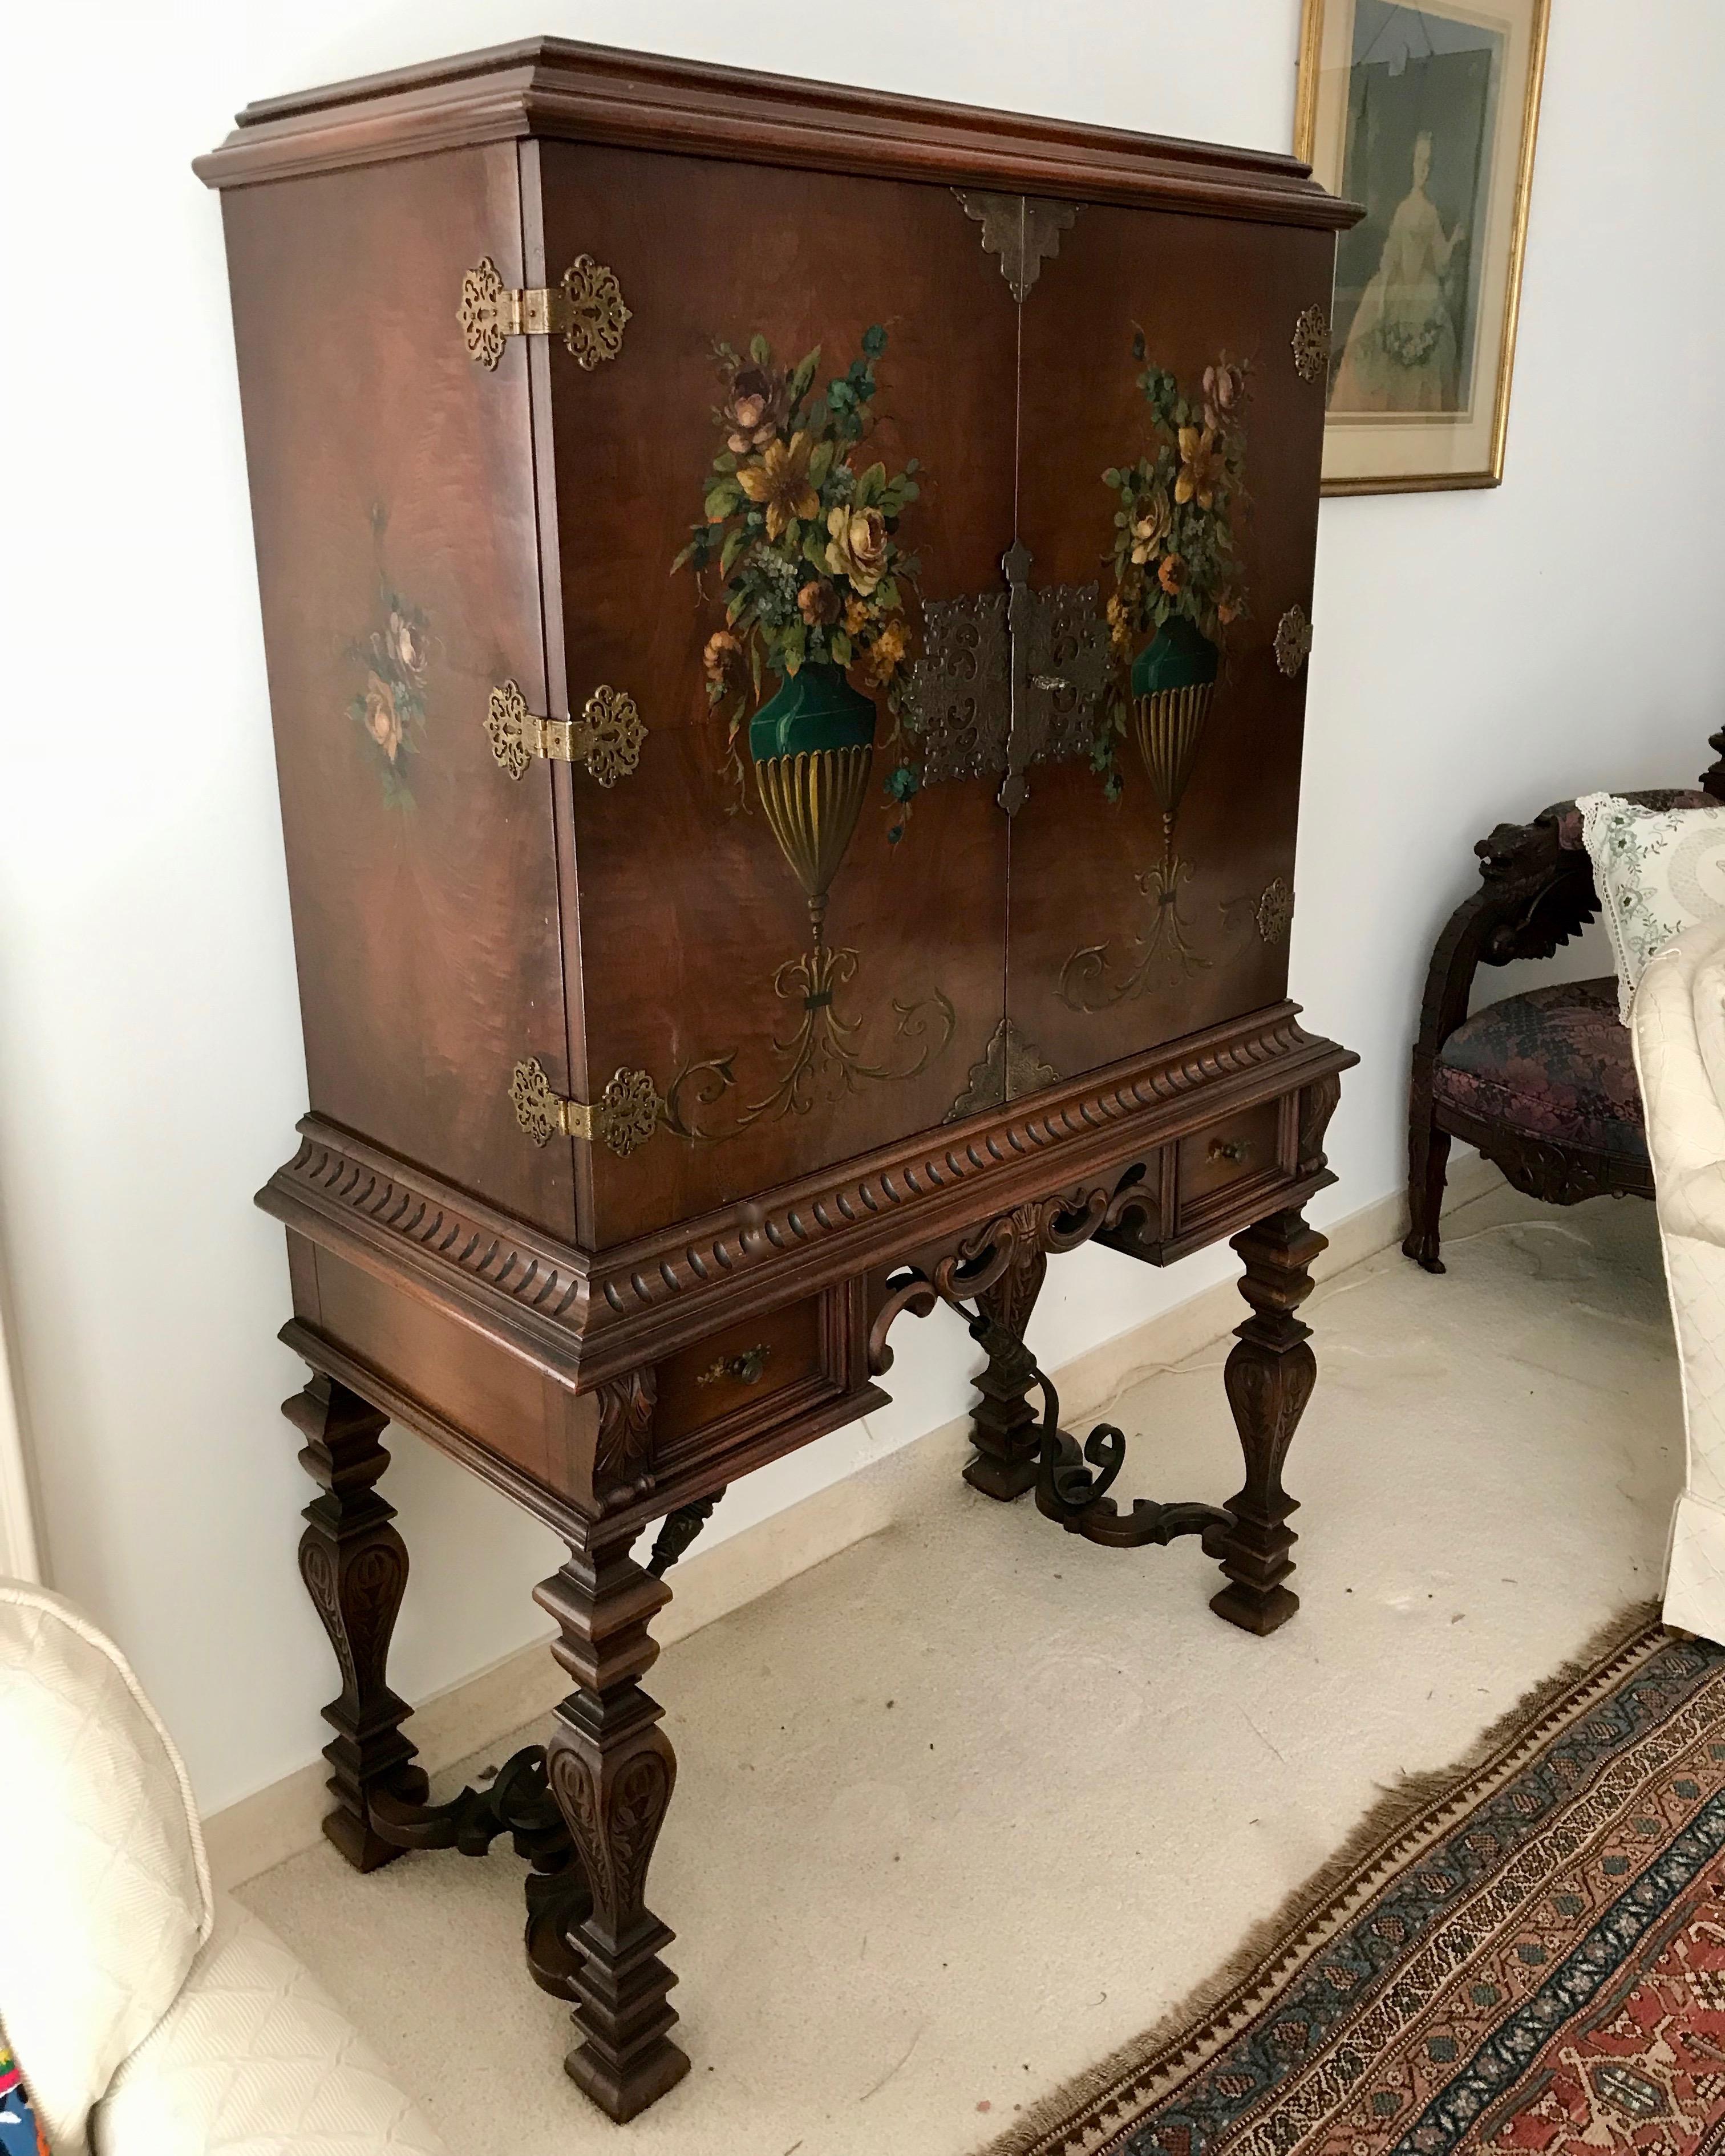 Highly decorative with hand painted urns adorning the 2 front doors -
which are richly appointed with elaborate hardware.
The cabinet is appointed with 2 drawers for holding bar accouterments -
corkscrews etc. The case is raised upon carved legs